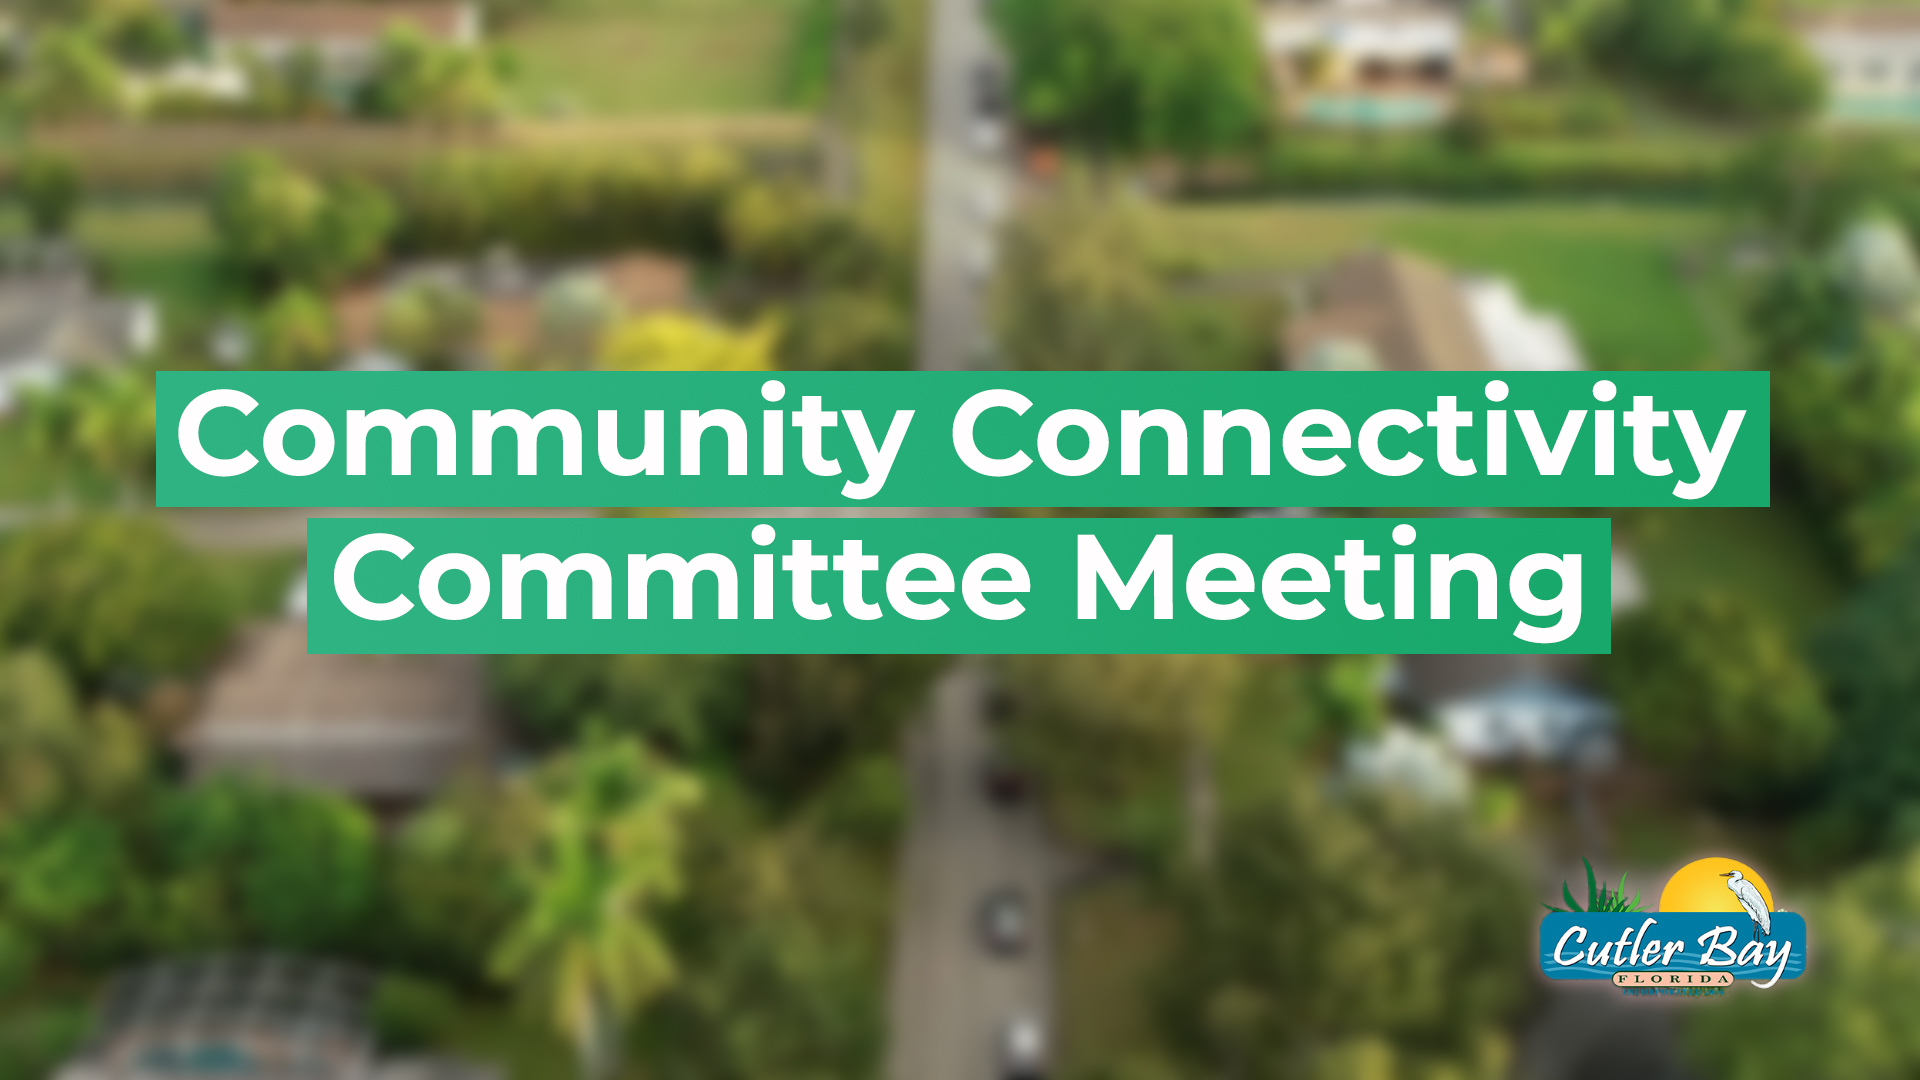 Community Connectivity Committee Town of Cutler Bay Florida